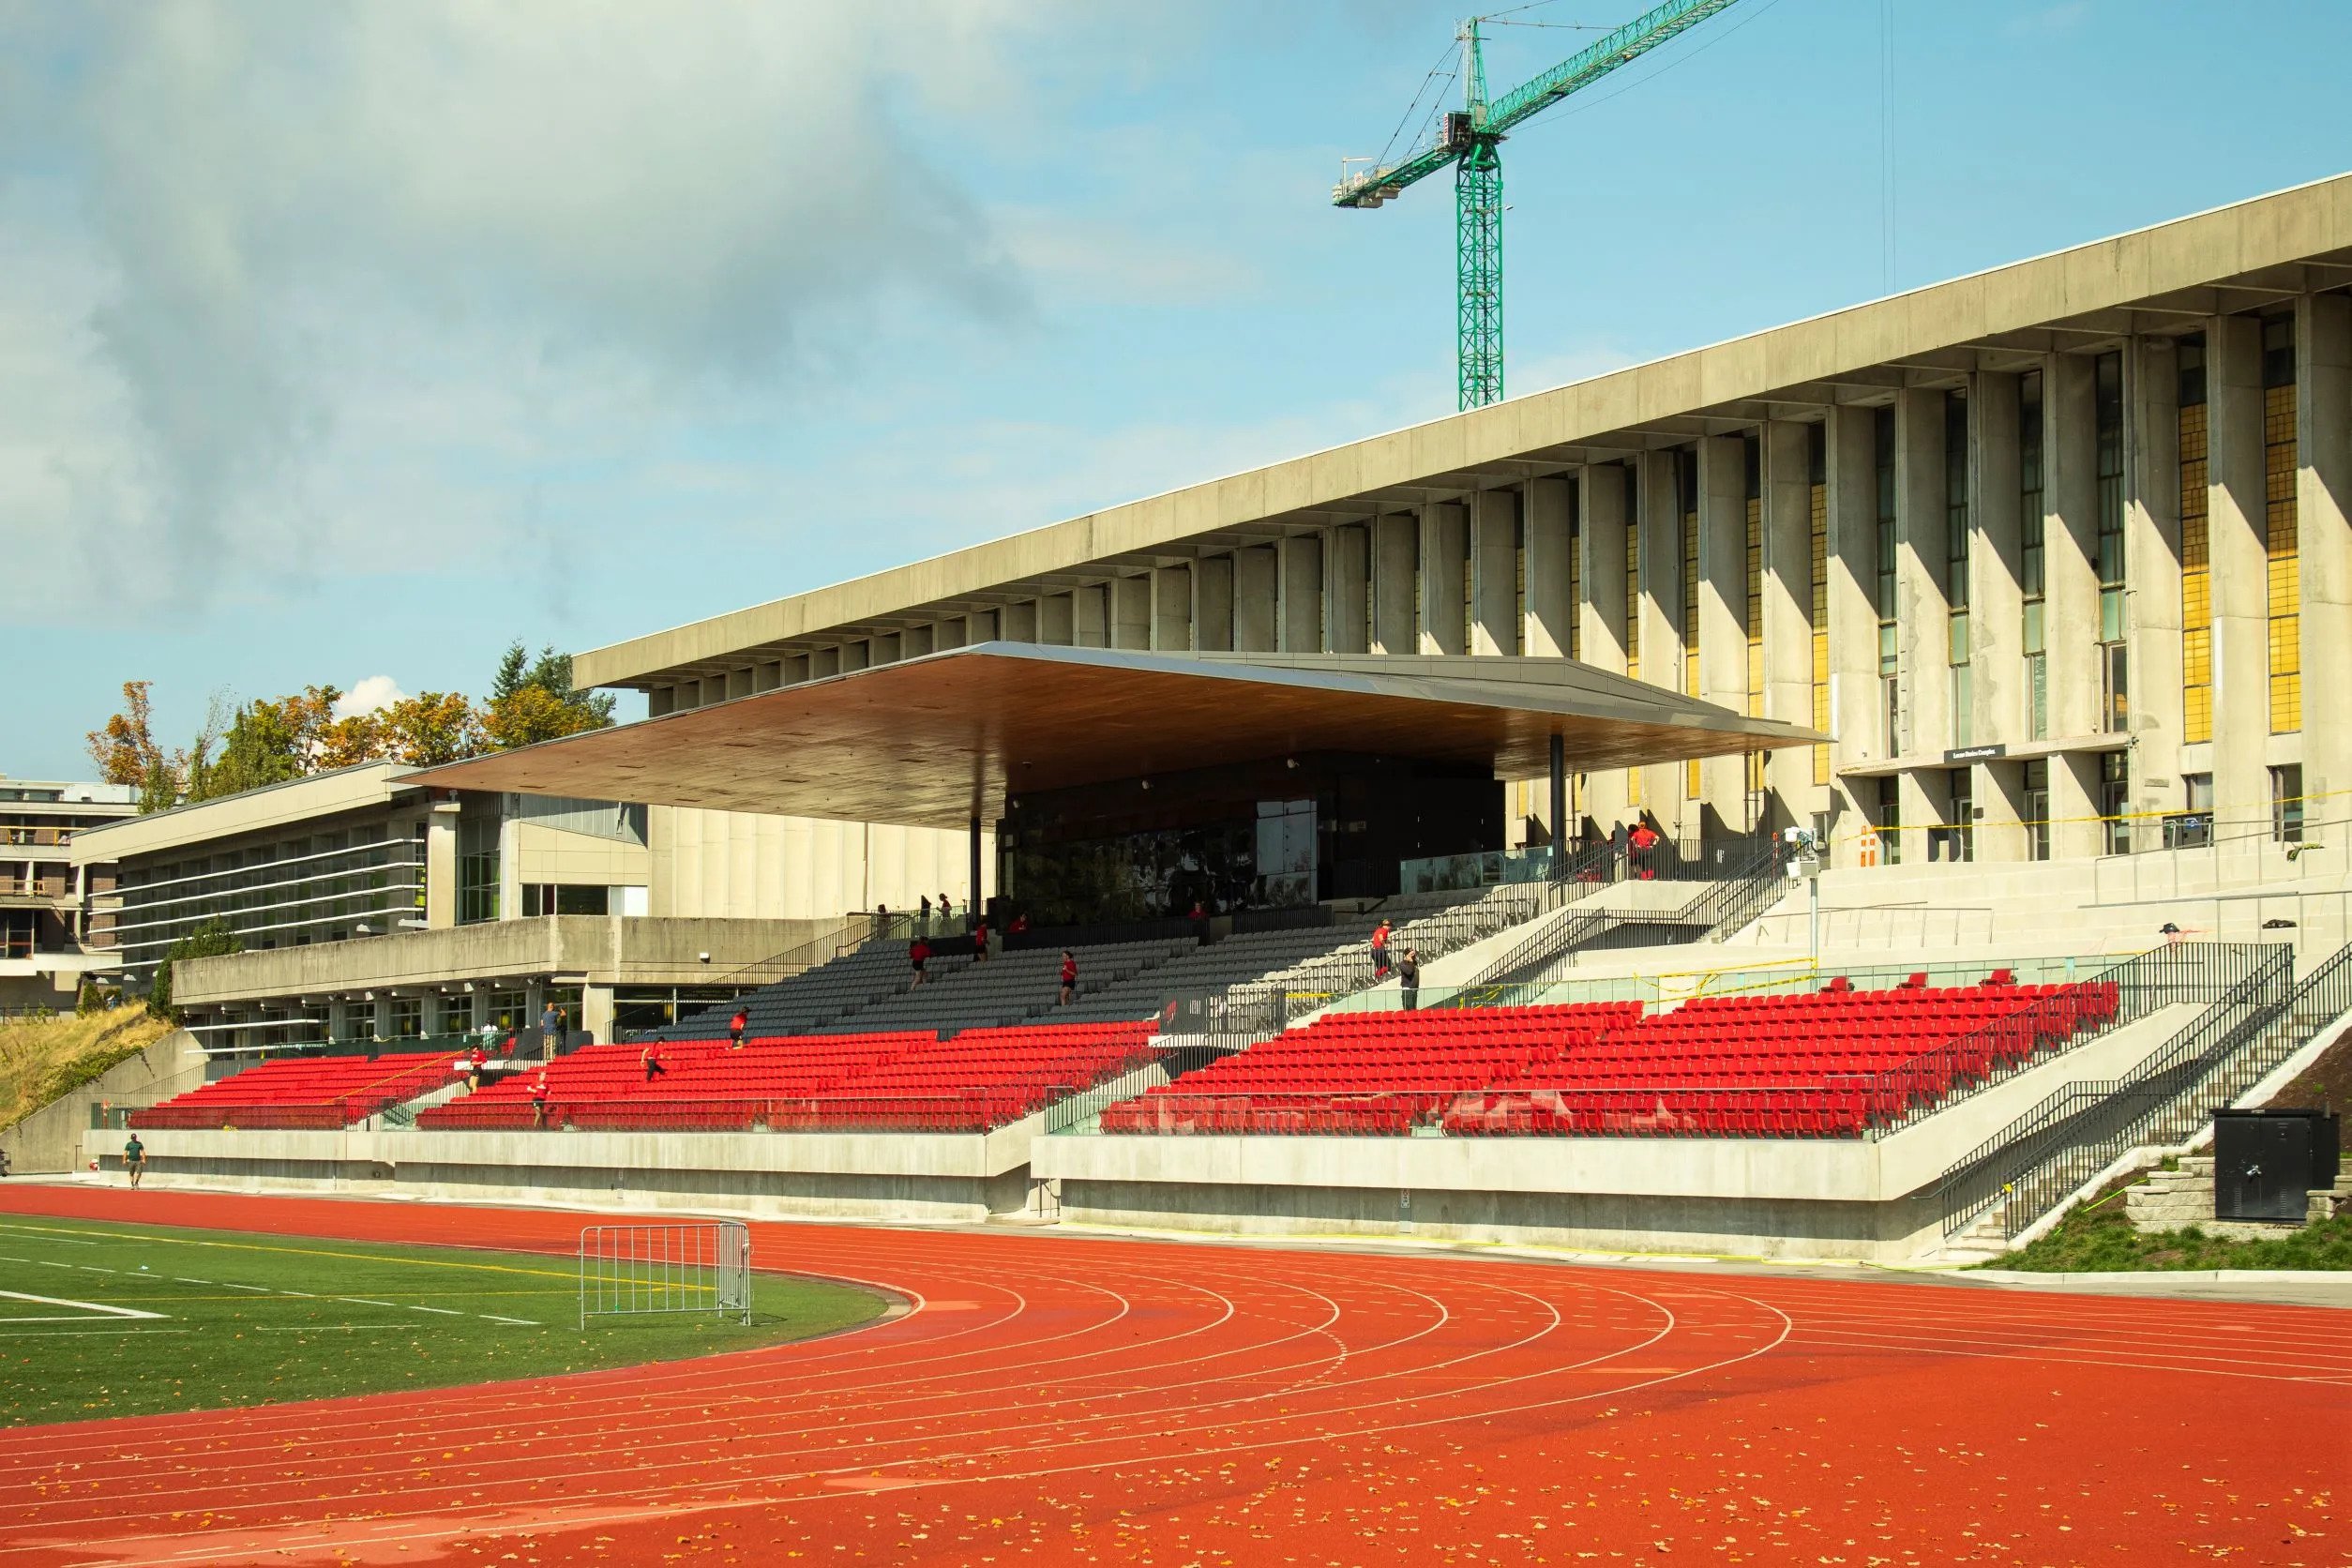 This photo is of the SFU stadium at the Burnaby Campus. The stadium is empty but it is a sunny day.